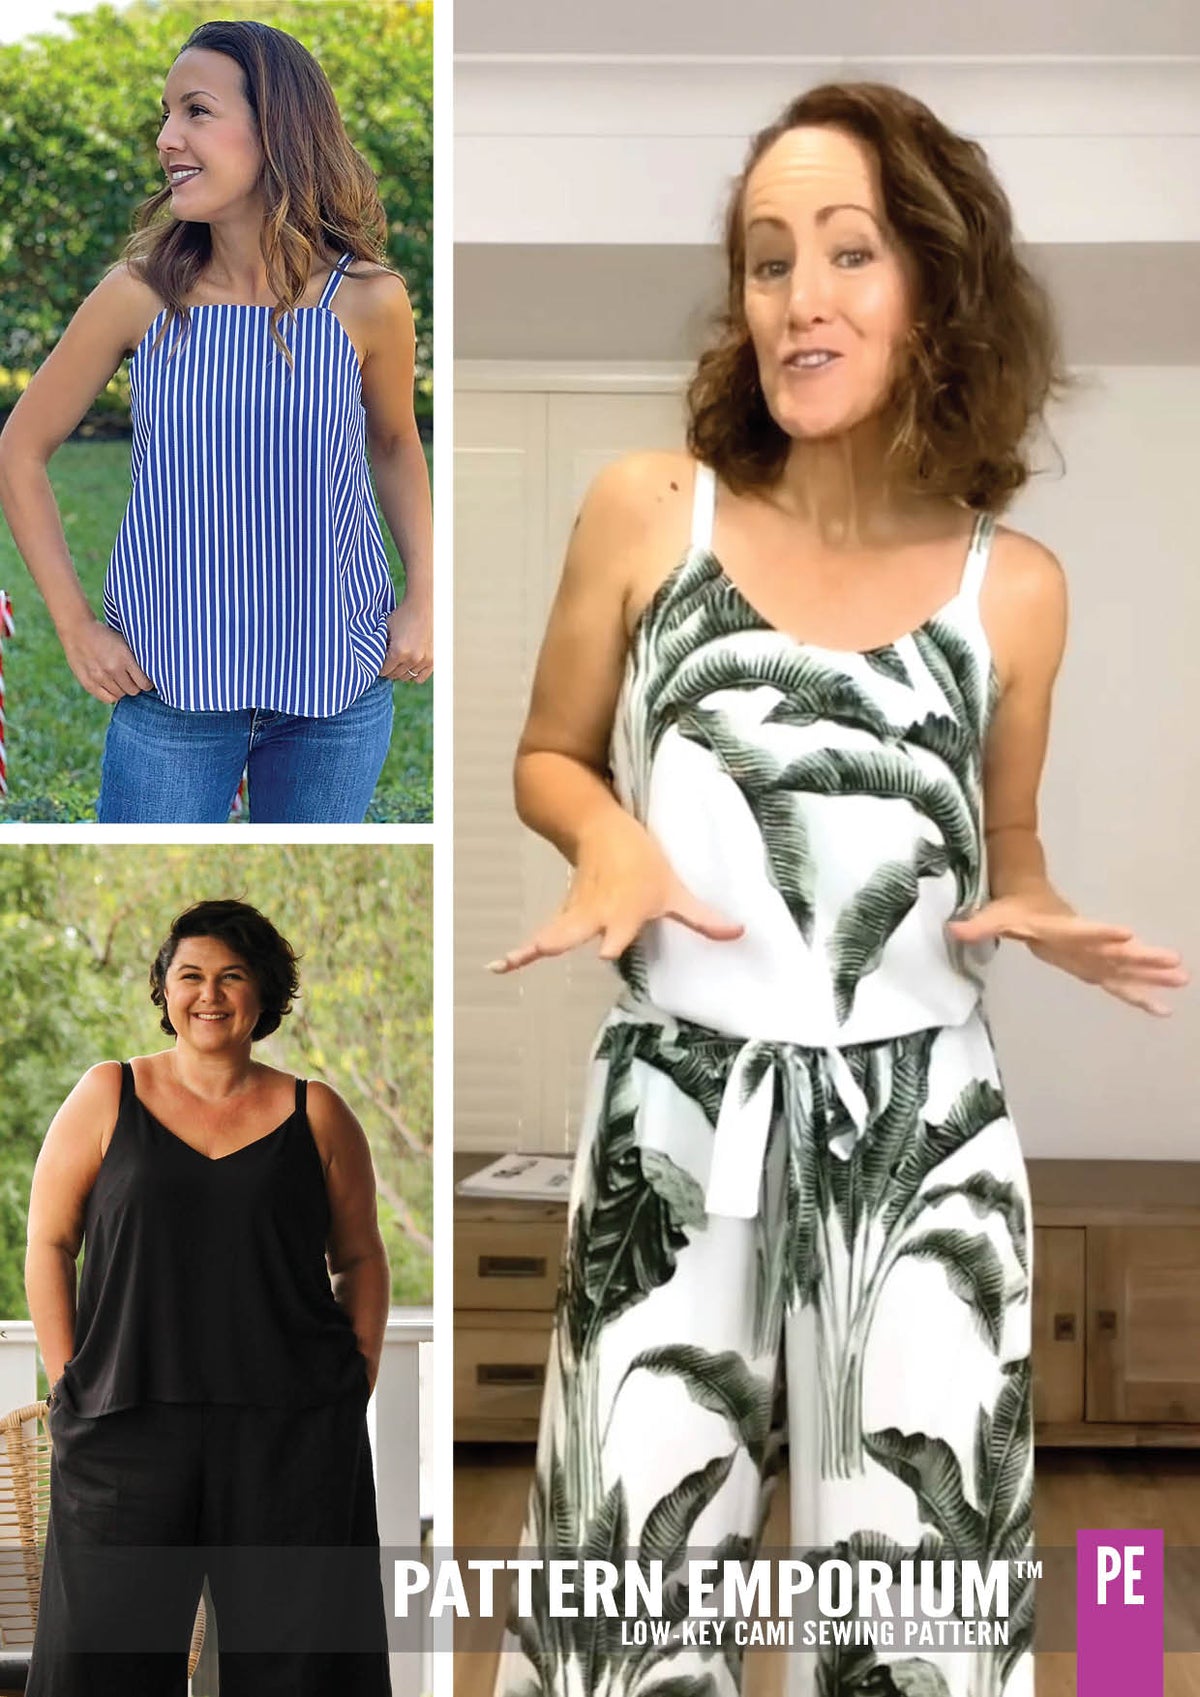 Low-Key Cami Top Sewing Pattern for Woven Fabrics - Pattern Emporium